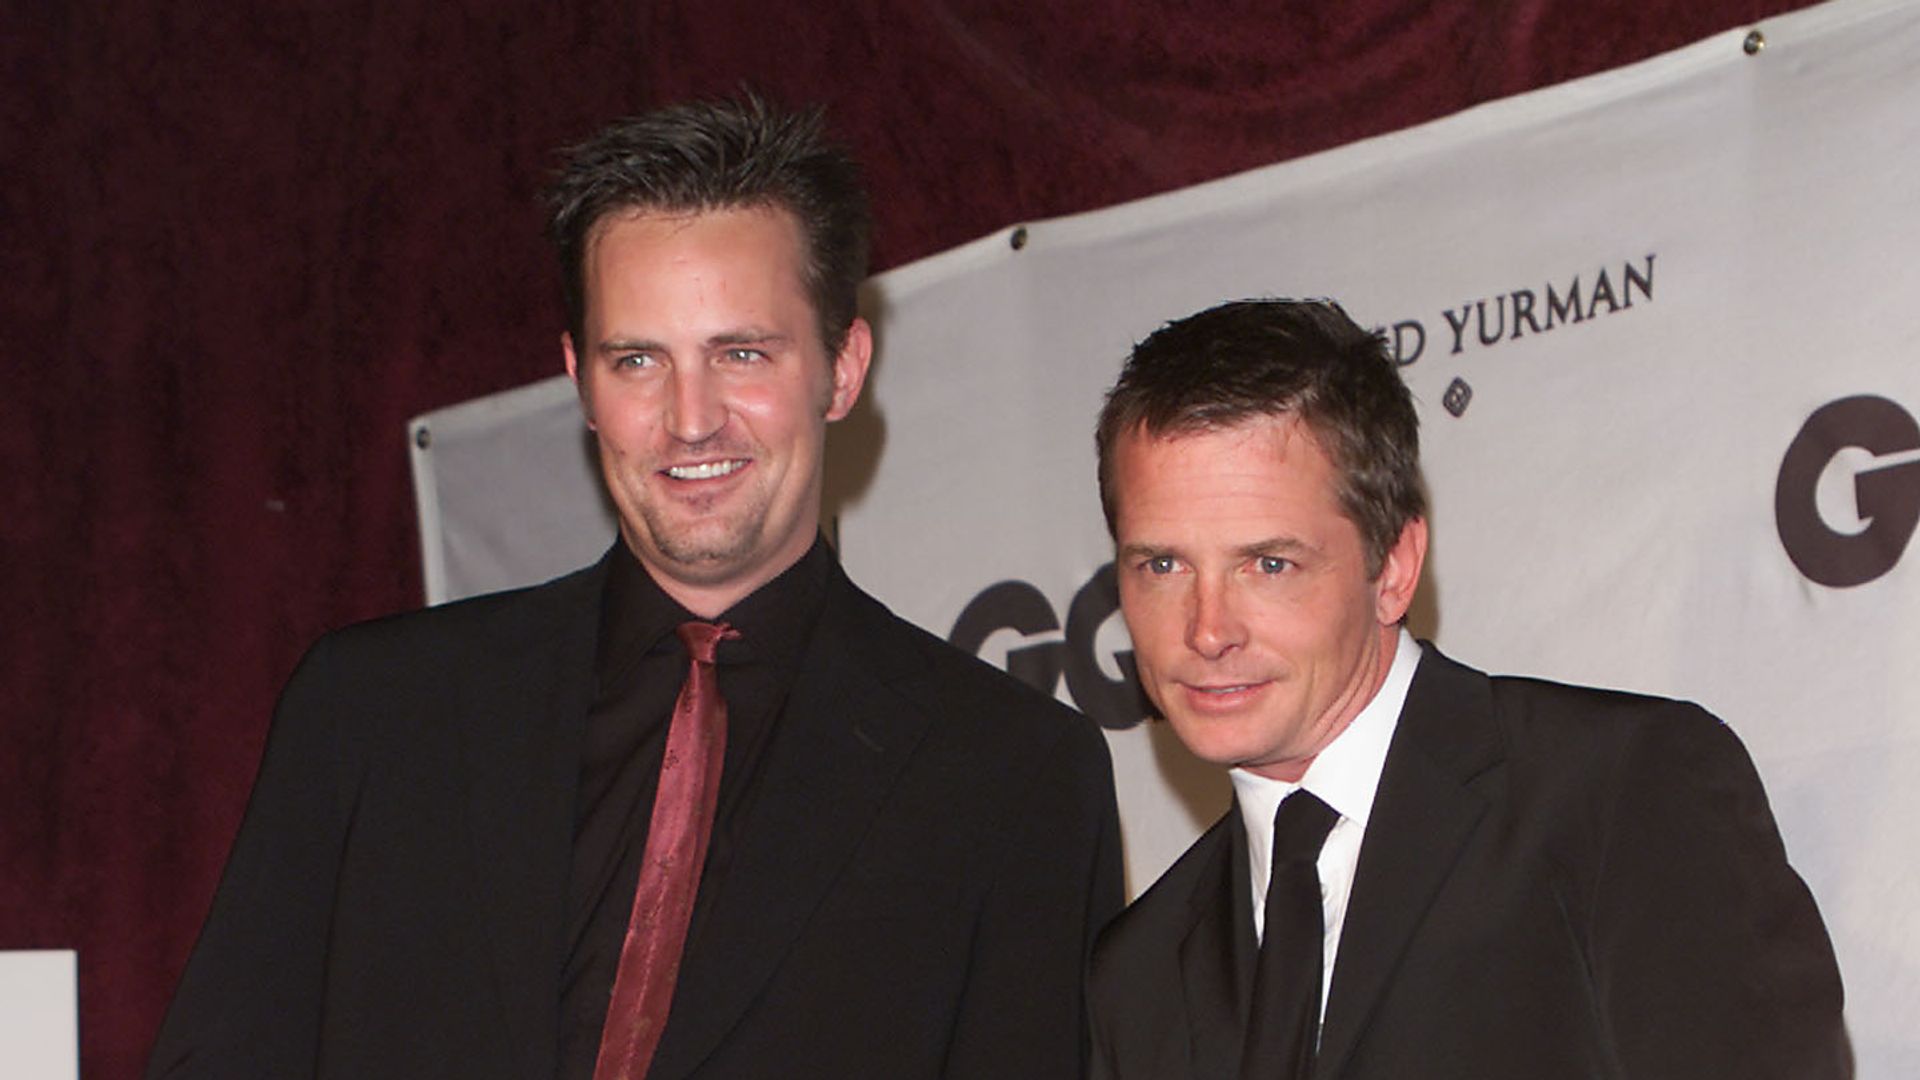 Matthew Perry winner of Television Comedy Award and Michael J. Fox winner of Man of Courage Award at the GQ 'Men of the Year Awards' held in New York City 10/26/2000